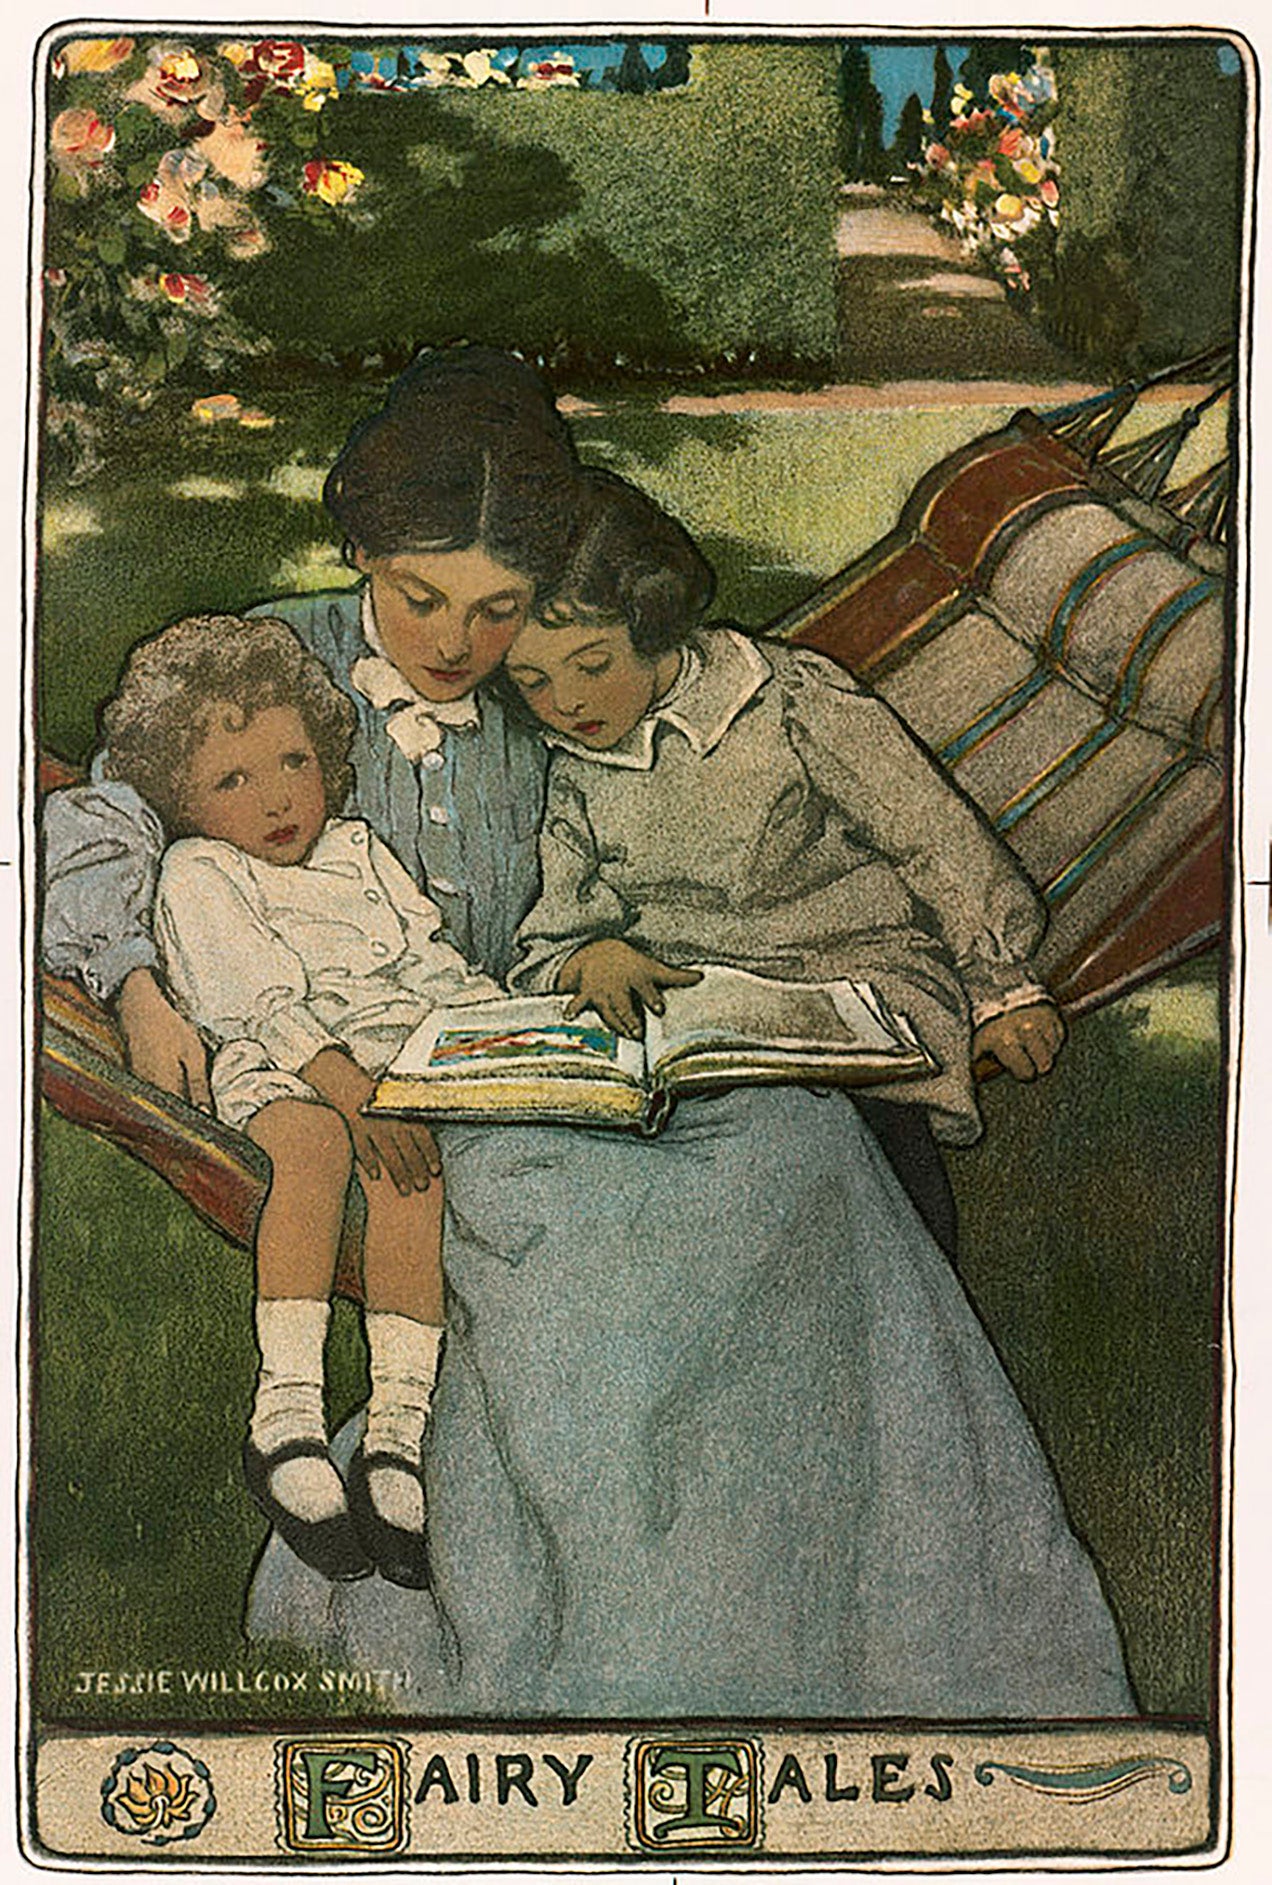  <img alt="jess wilcox smith painting mother reading to children"> 